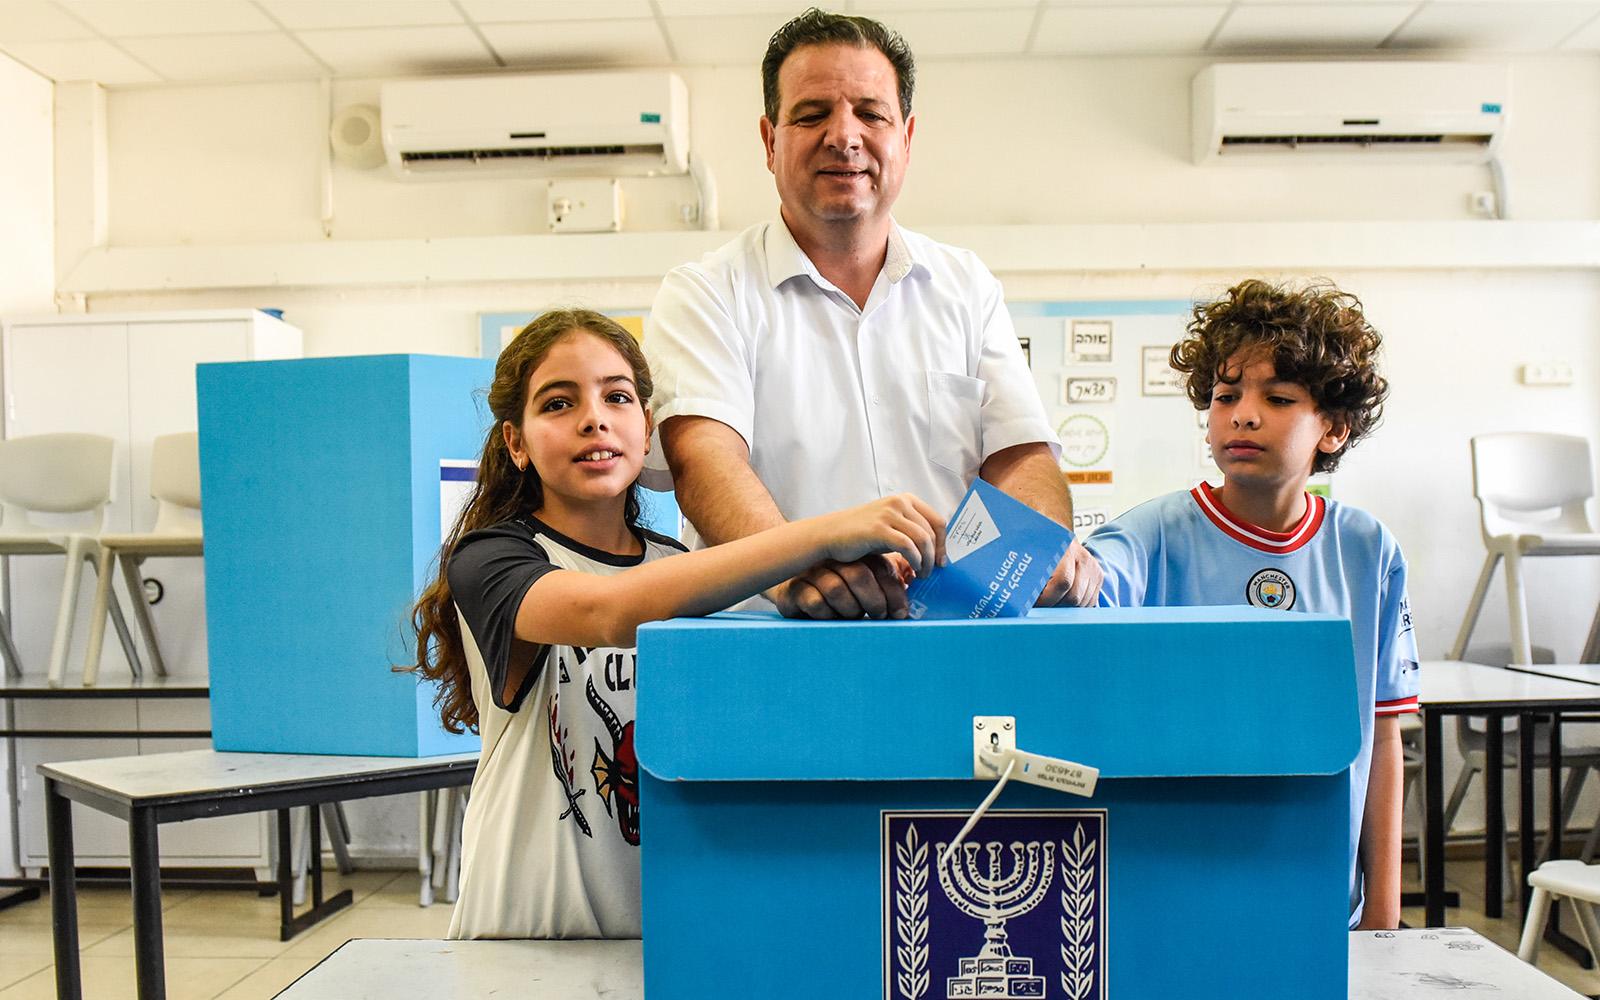 Hadash-Ta’al leader Ayman Odeh casts his ballot at a voting station in Hafia, on November 1, 2022. (Roni Ofer/Flash90)